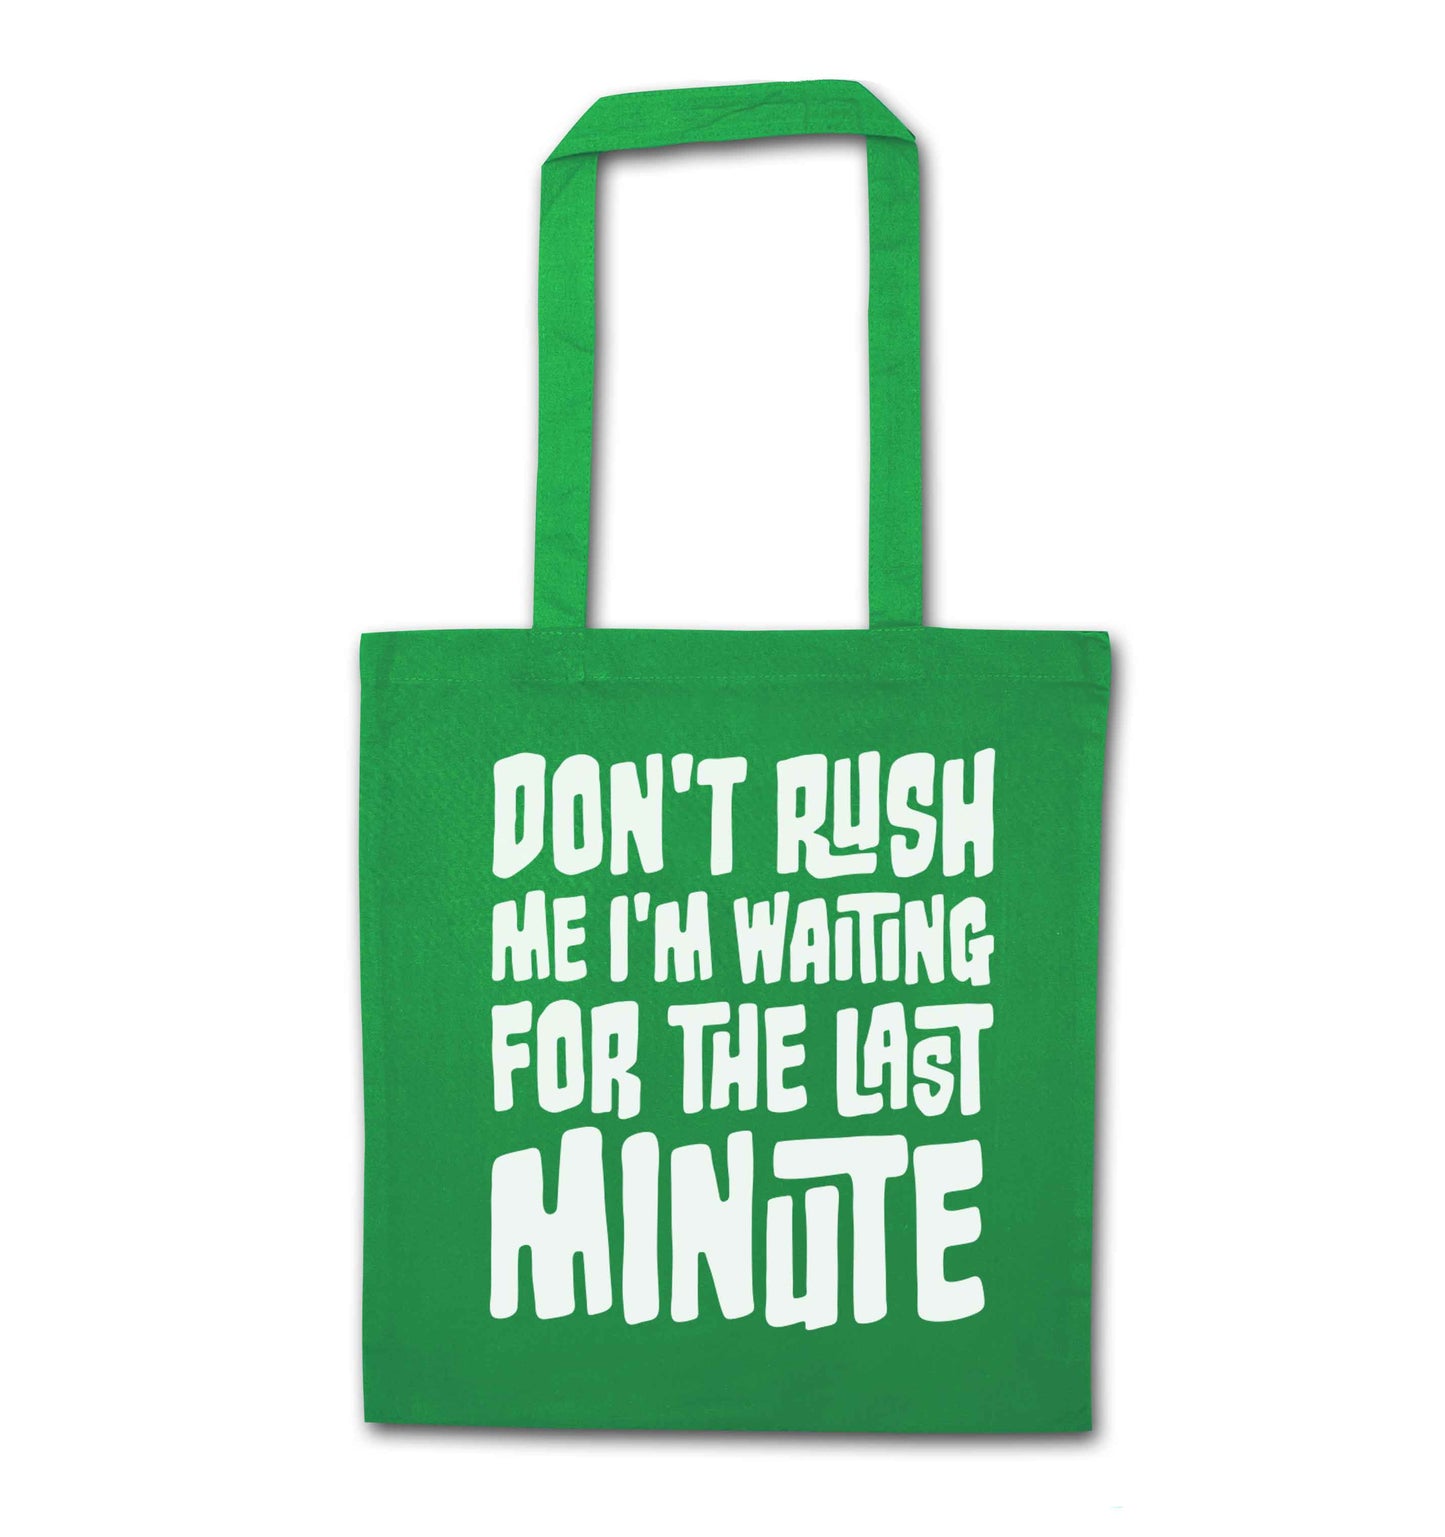 Don't rush me I'm waiting for the last minute green tote bag